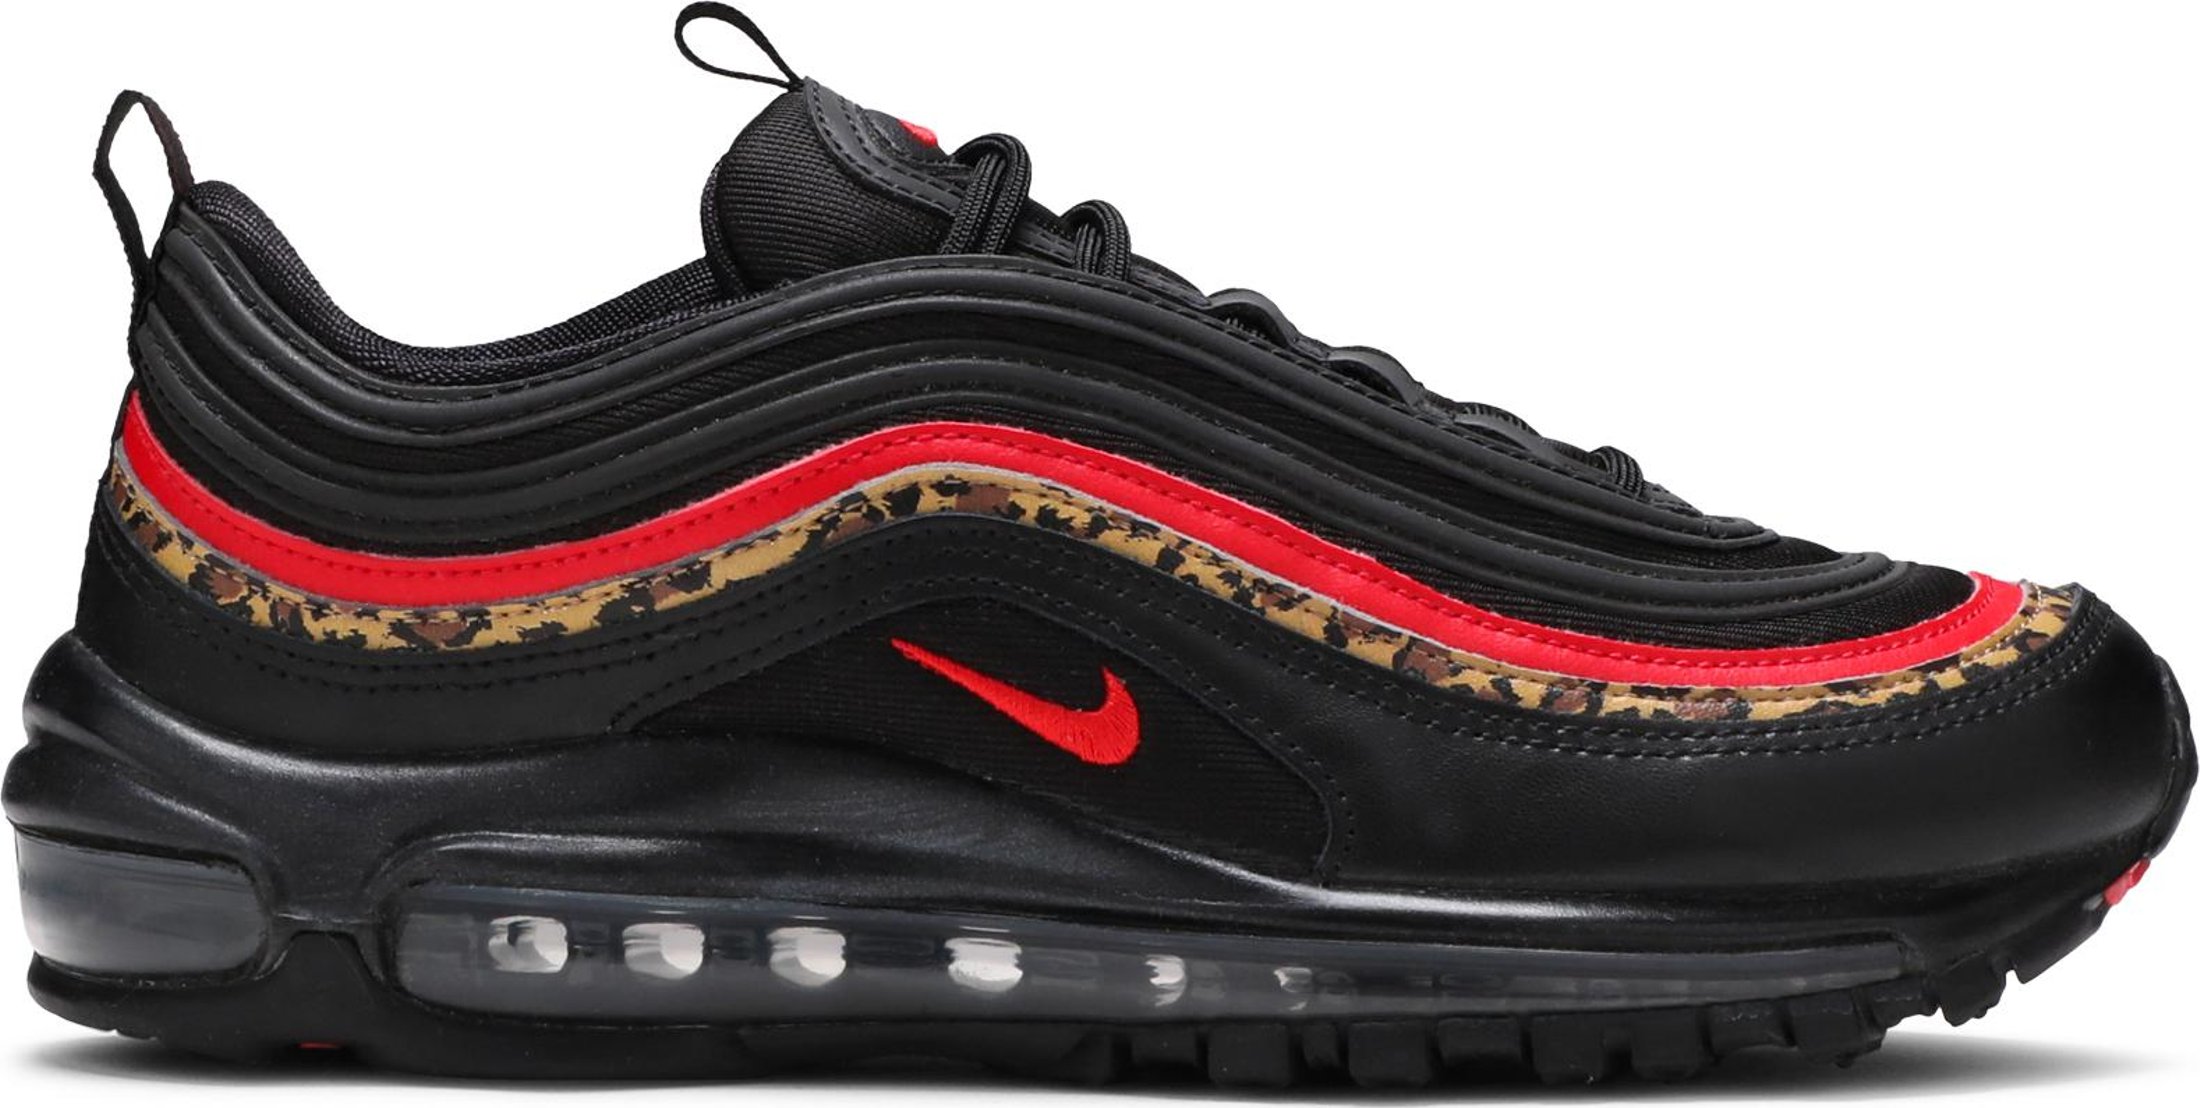 Buy Wmns Air Max 97 'Leopard Pack' - BV6113 001 | GOAT